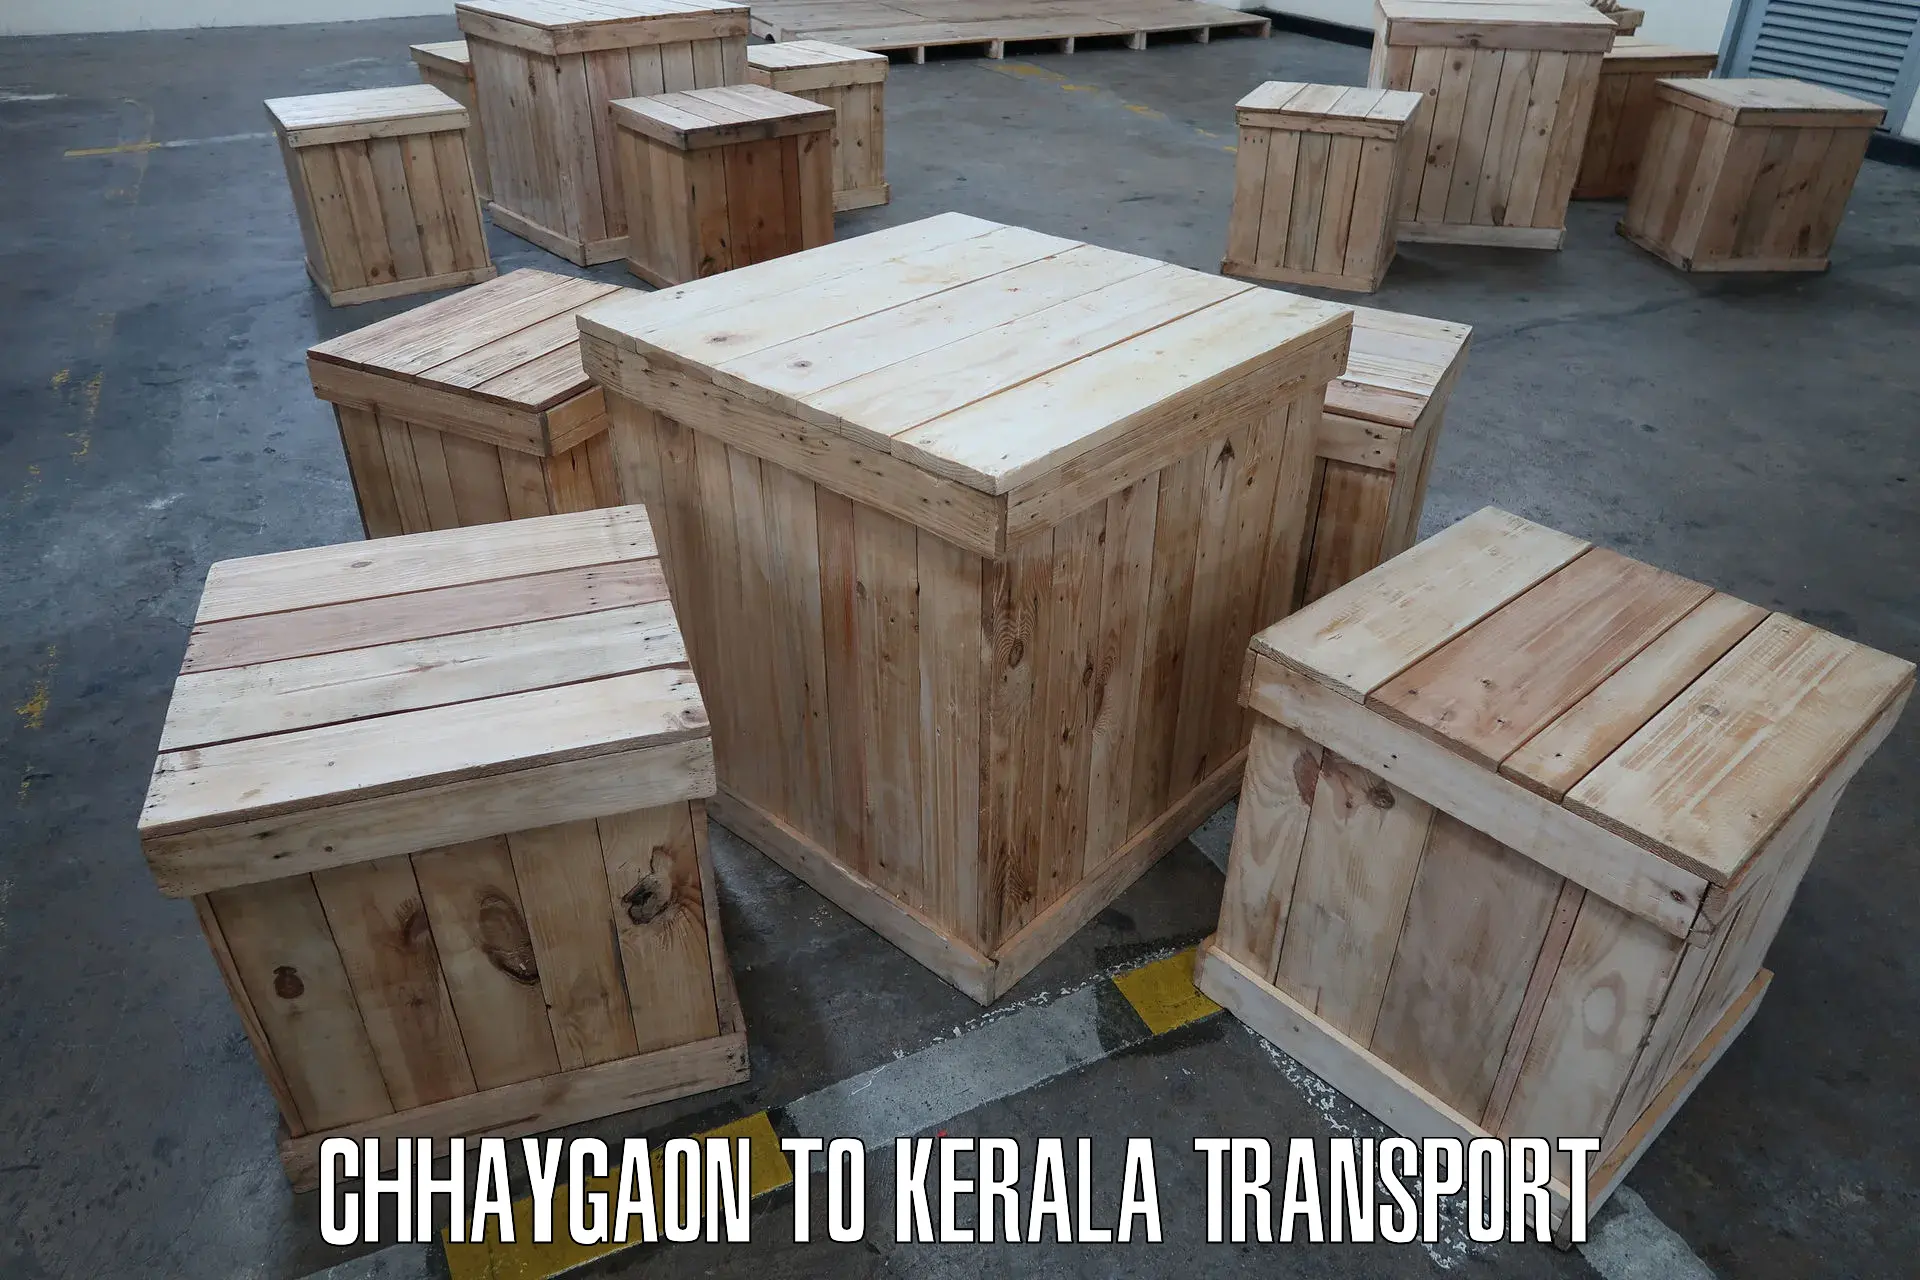 Truck transport companies in India Chhaygaon to Cochin University of Science and Technology